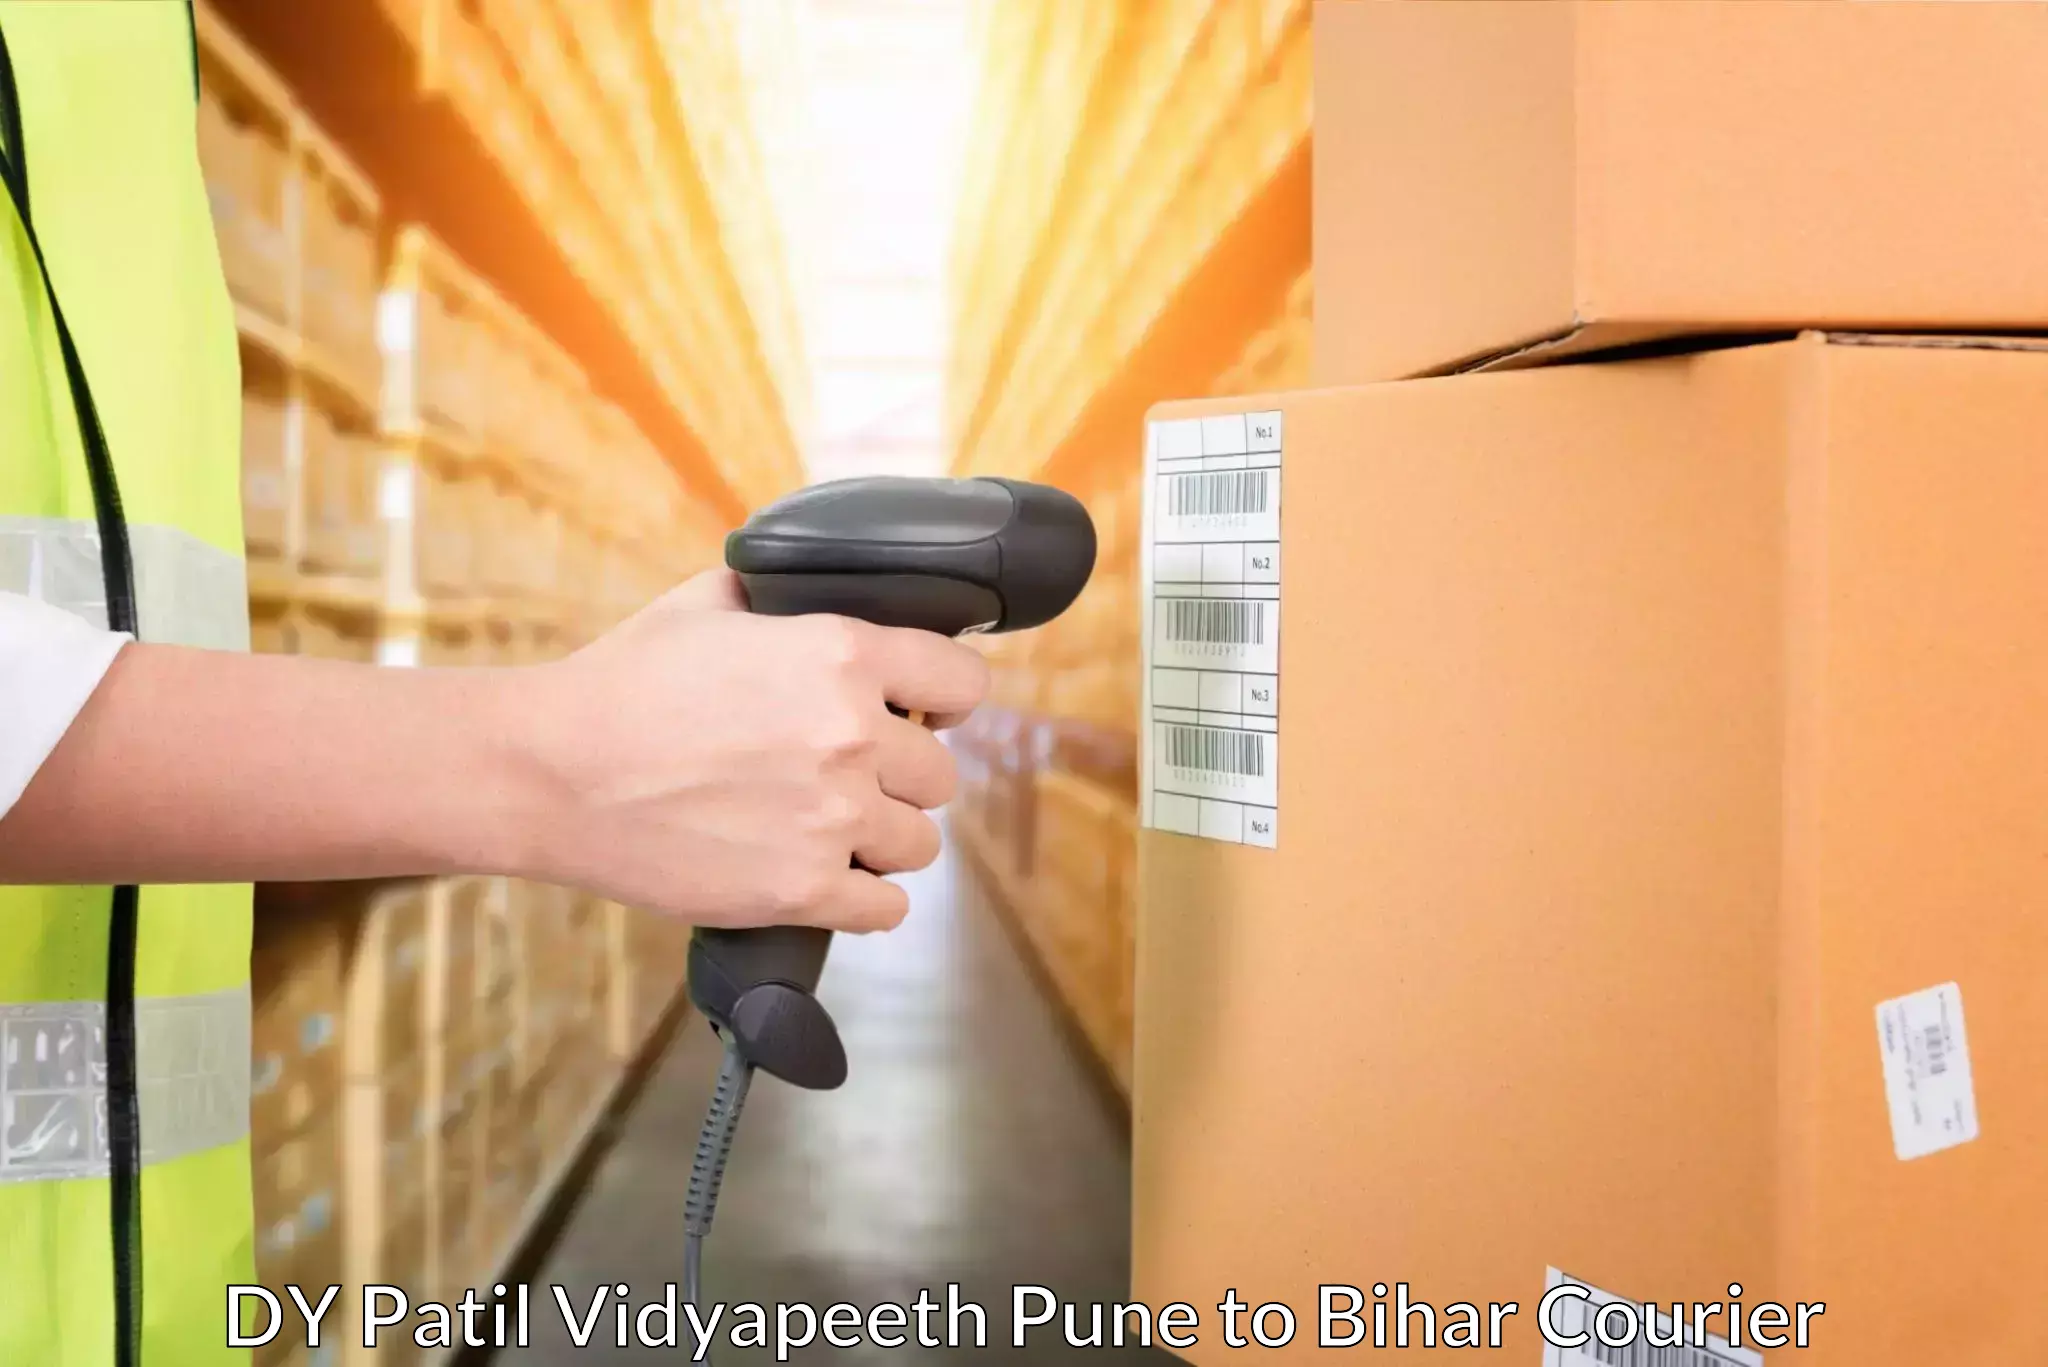 Cash on delivery service DY Patil Vidyapeeth Pune to Sharfuddinpur